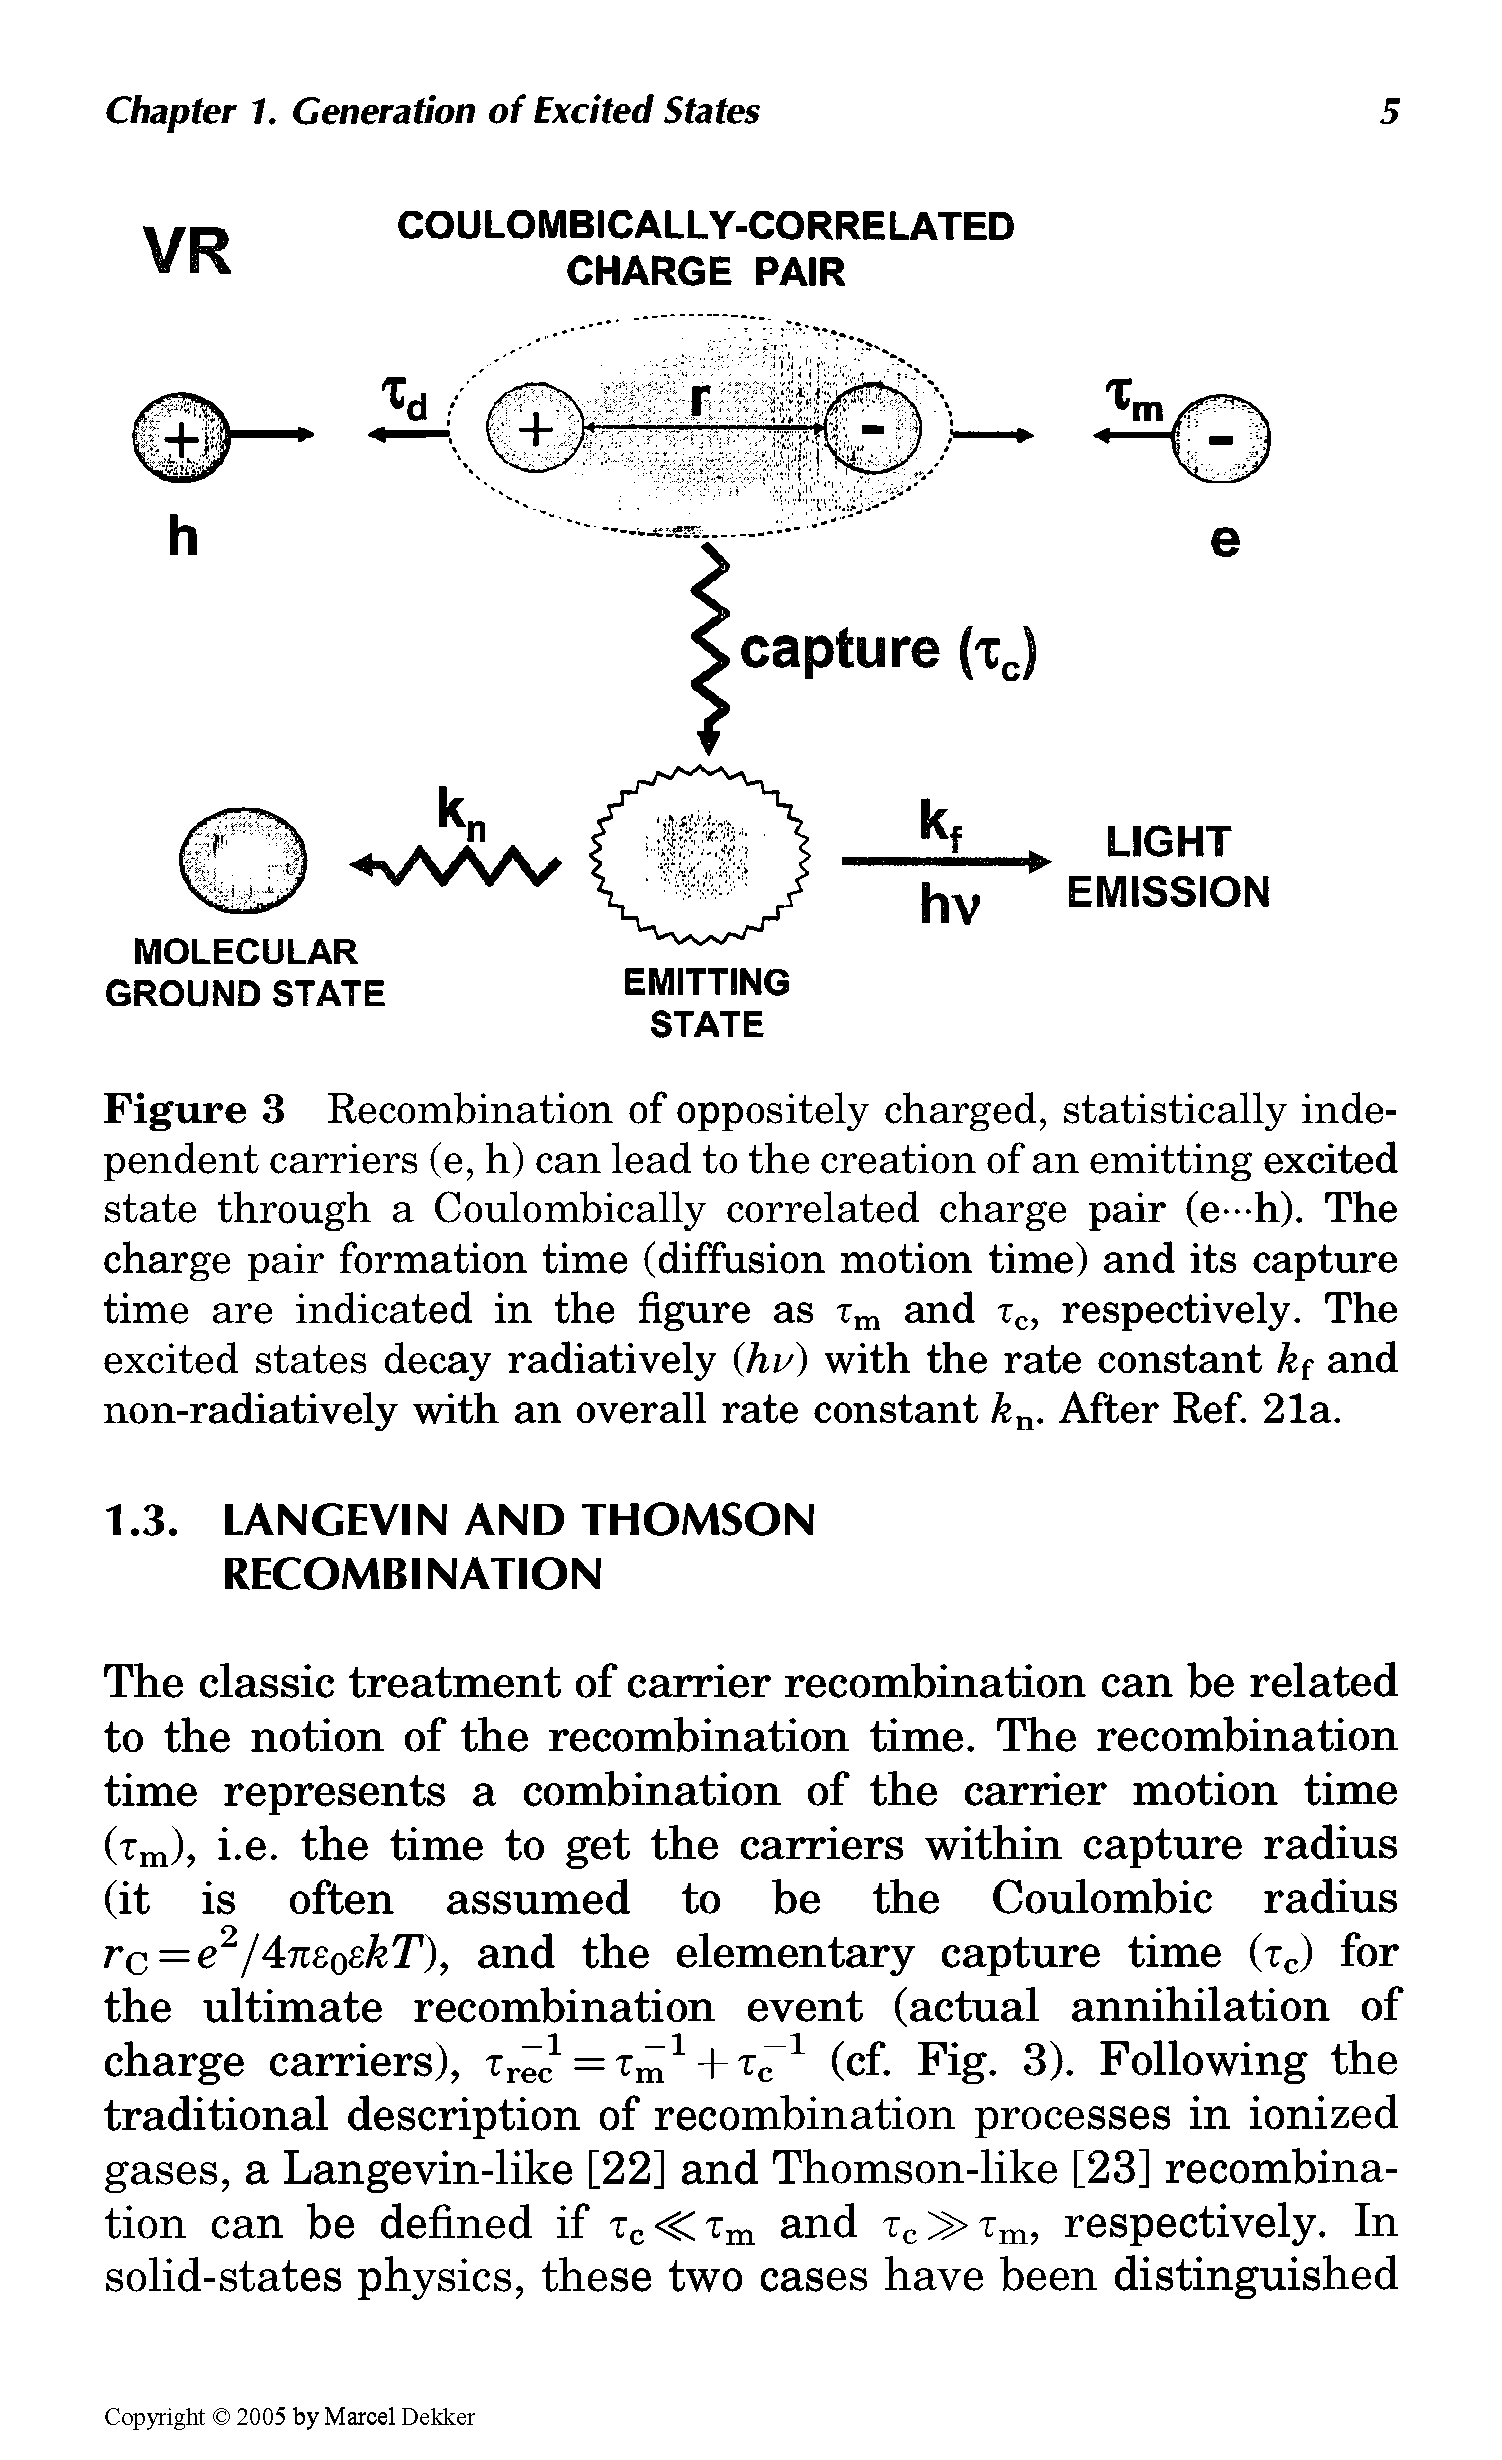 Figure 3 Recombination of oppositely charged, statistically independent carriers (e, h) can lead to the creation of an emitting excited state through a Coulombically correlated charge pair (e—h). The charge pair formation time (diffusion motion time) and its capture time are indicated in the figure as im and tc, respectively. The excited states decay radiatively (hi/) with the rate constant k and non-radiatively with an overall rate constant kn. After Ref. 21a.